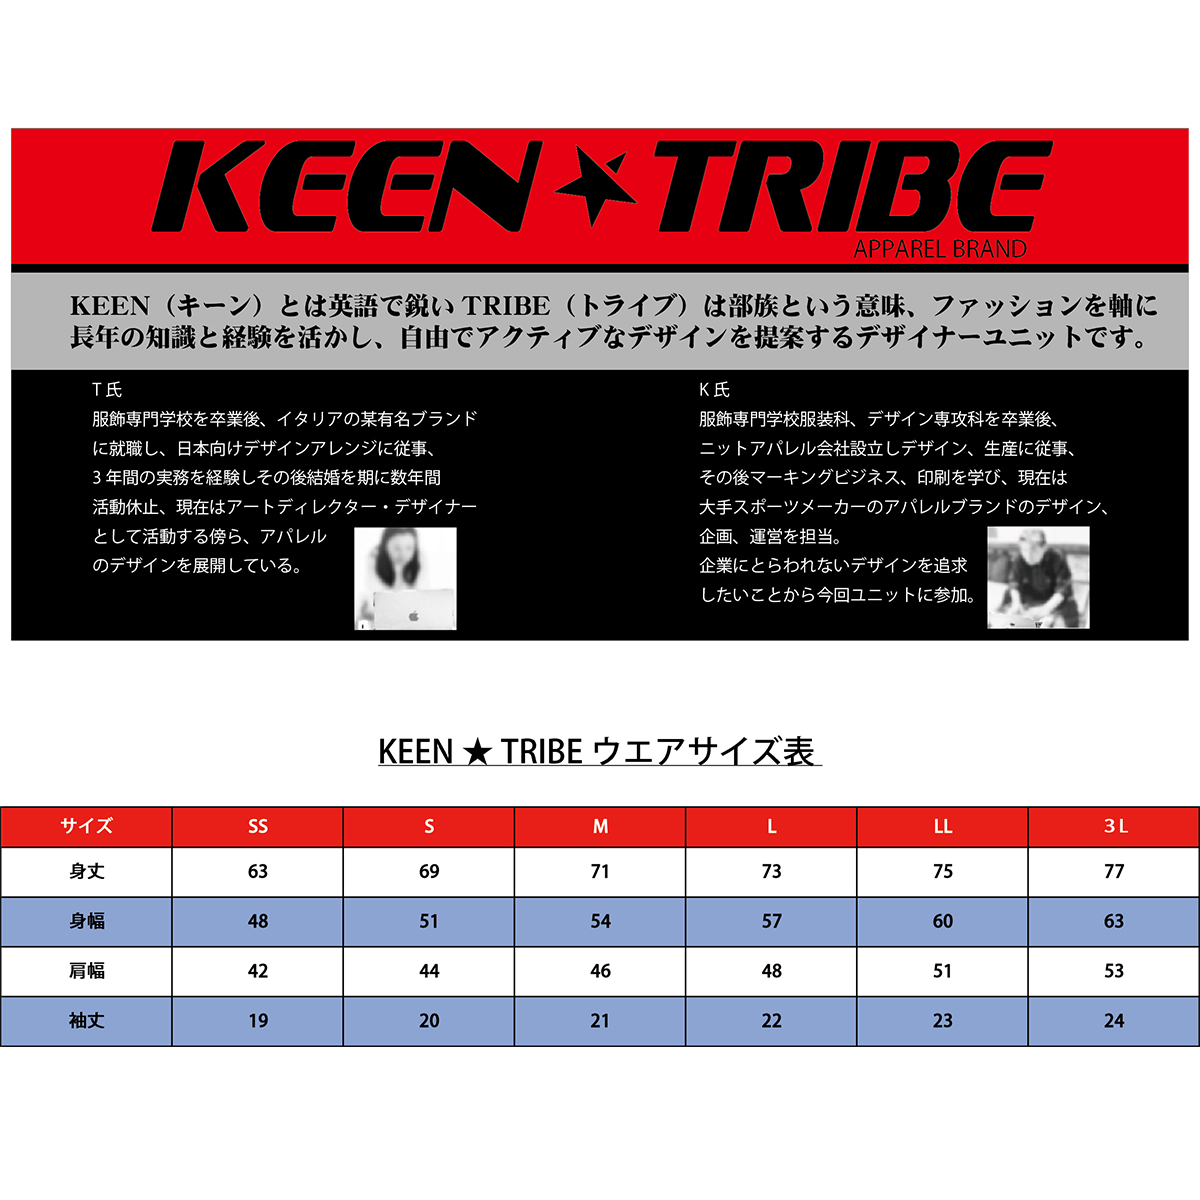 KEEN ★ TRIBE　KT-55(受注生産)